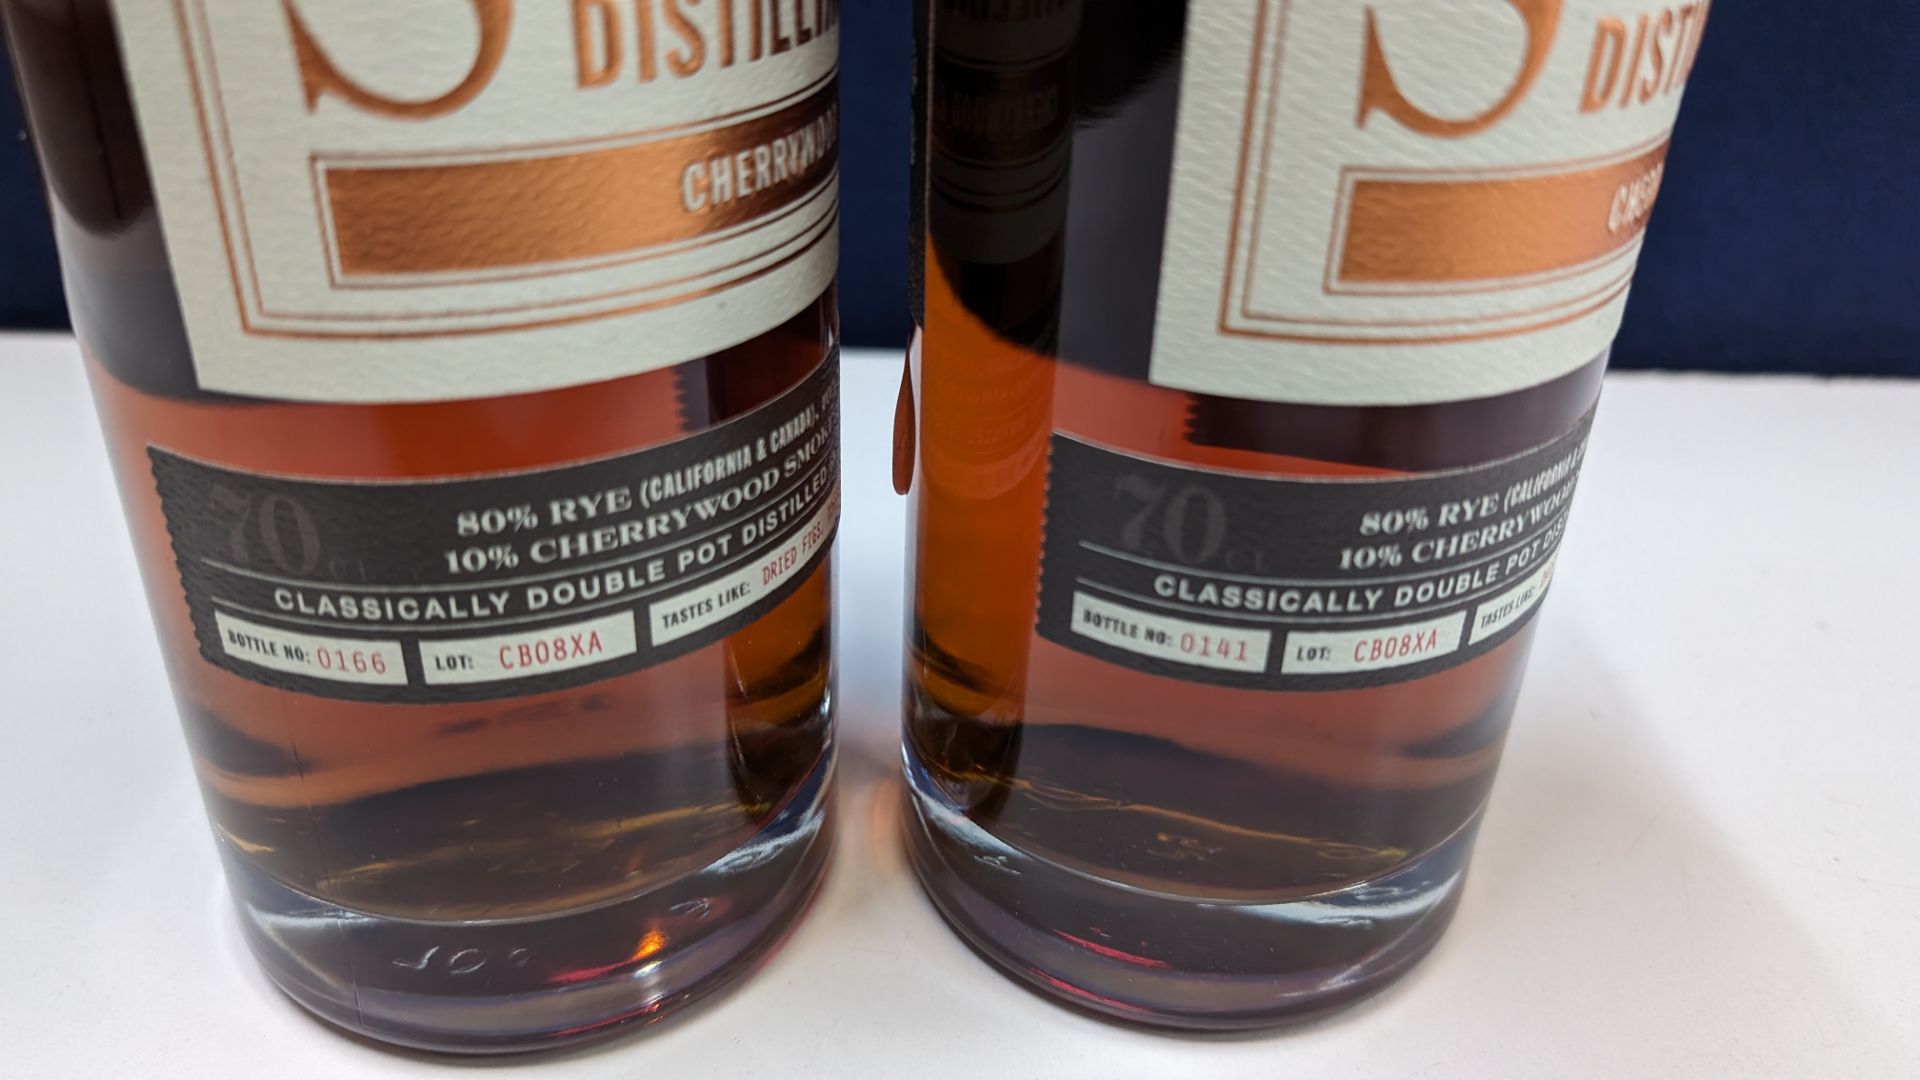 2 off 700ml bottles of Sonoma Cherrywood Rye Whiskey. 47.8% alc/vol (95.6 proof). Distilled and bo - Image 5 of 6